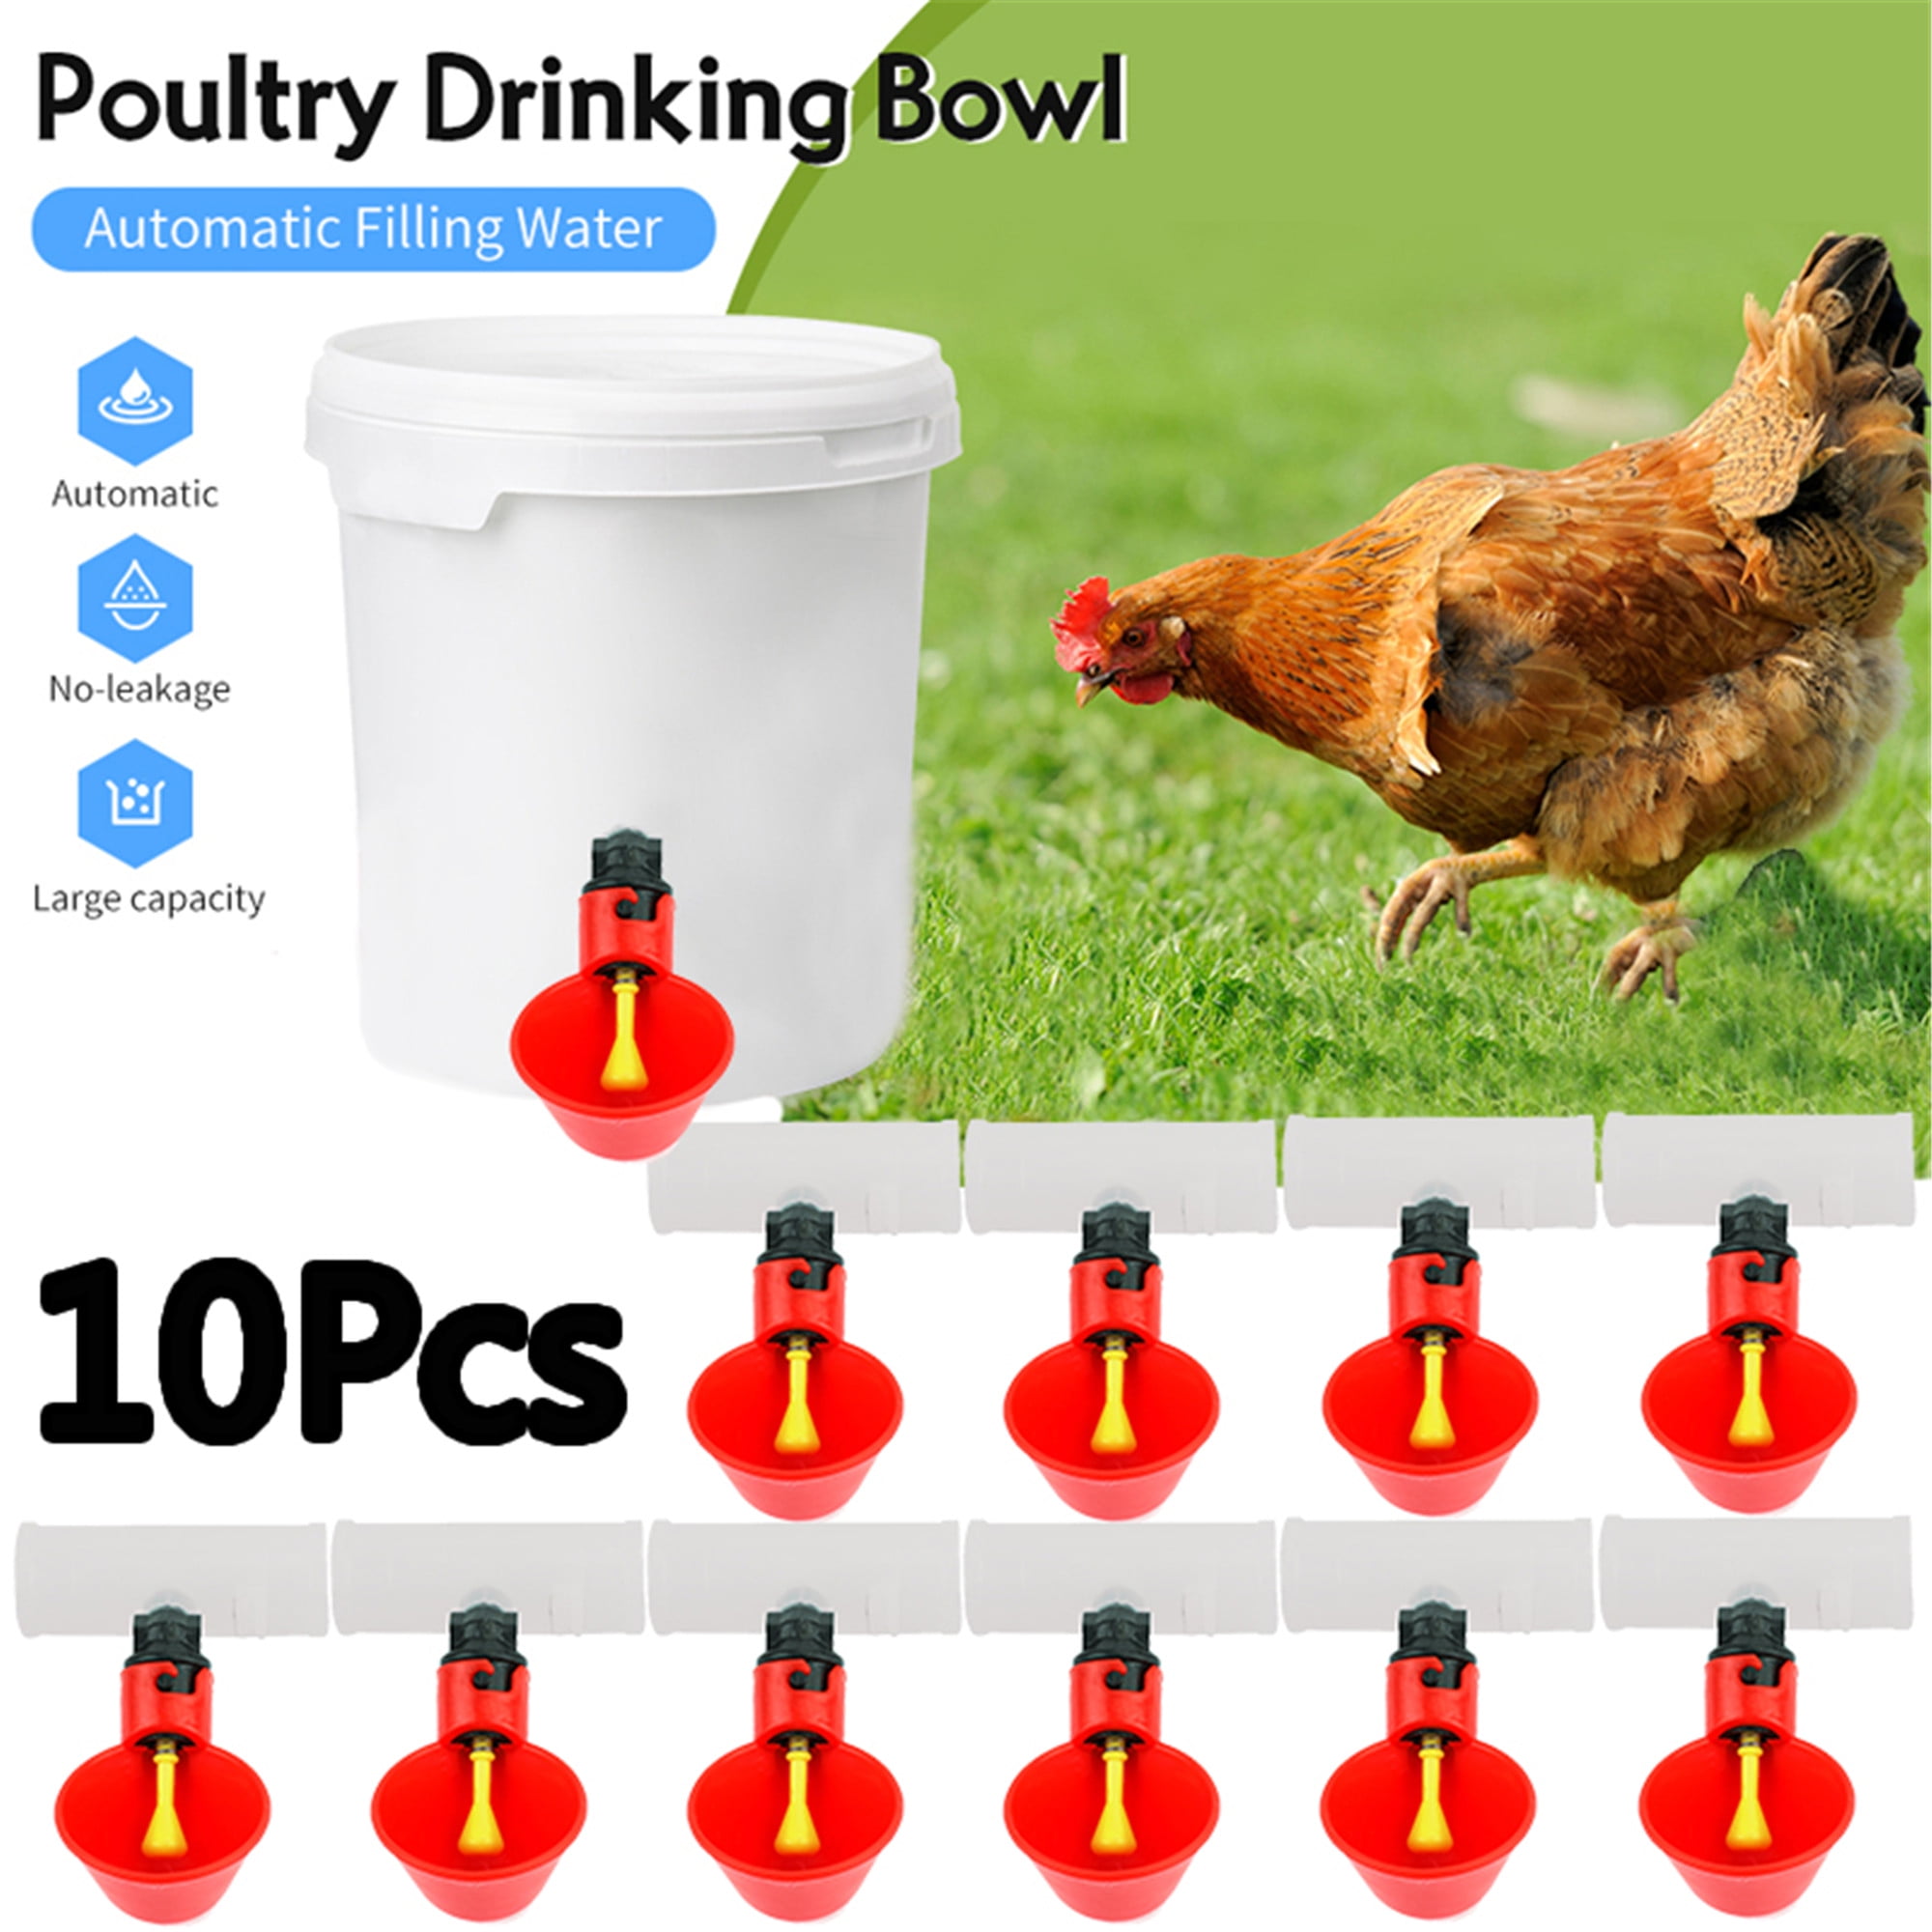 12 POULTRY DRINKER Waterers Chickens Hens Chicks Turkey Quail Poultry Birds 